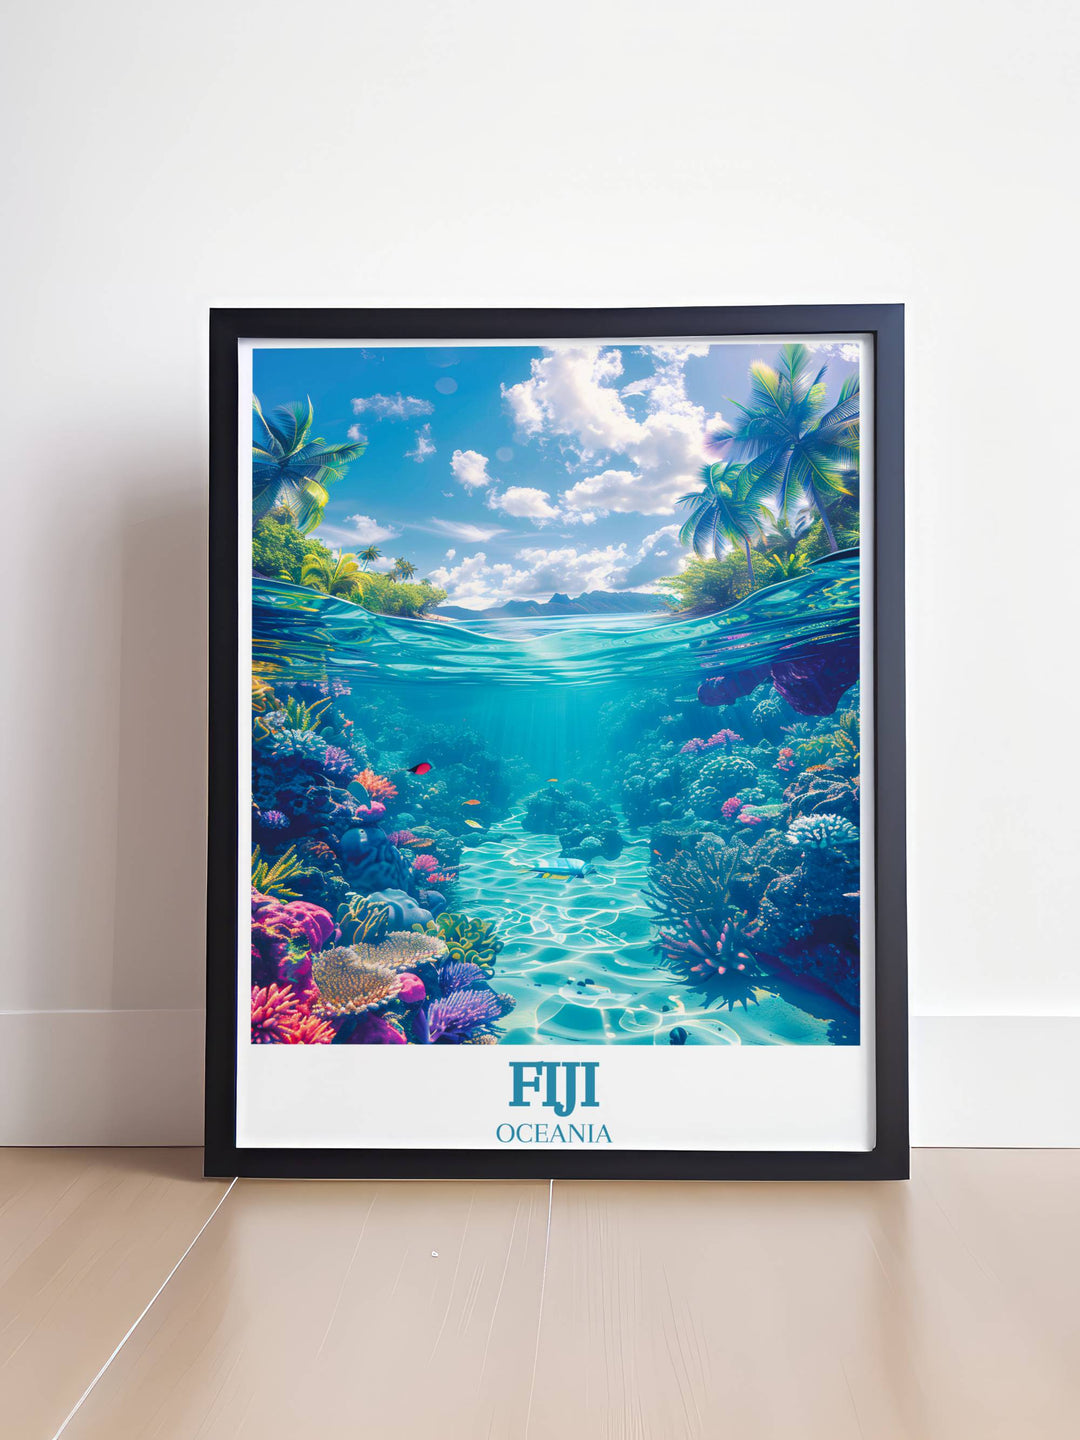 Artistic Fiji Poster Print of The Great Astrolabe Reef, blending vibrant colors and detailed textures for an immersive wall art experience